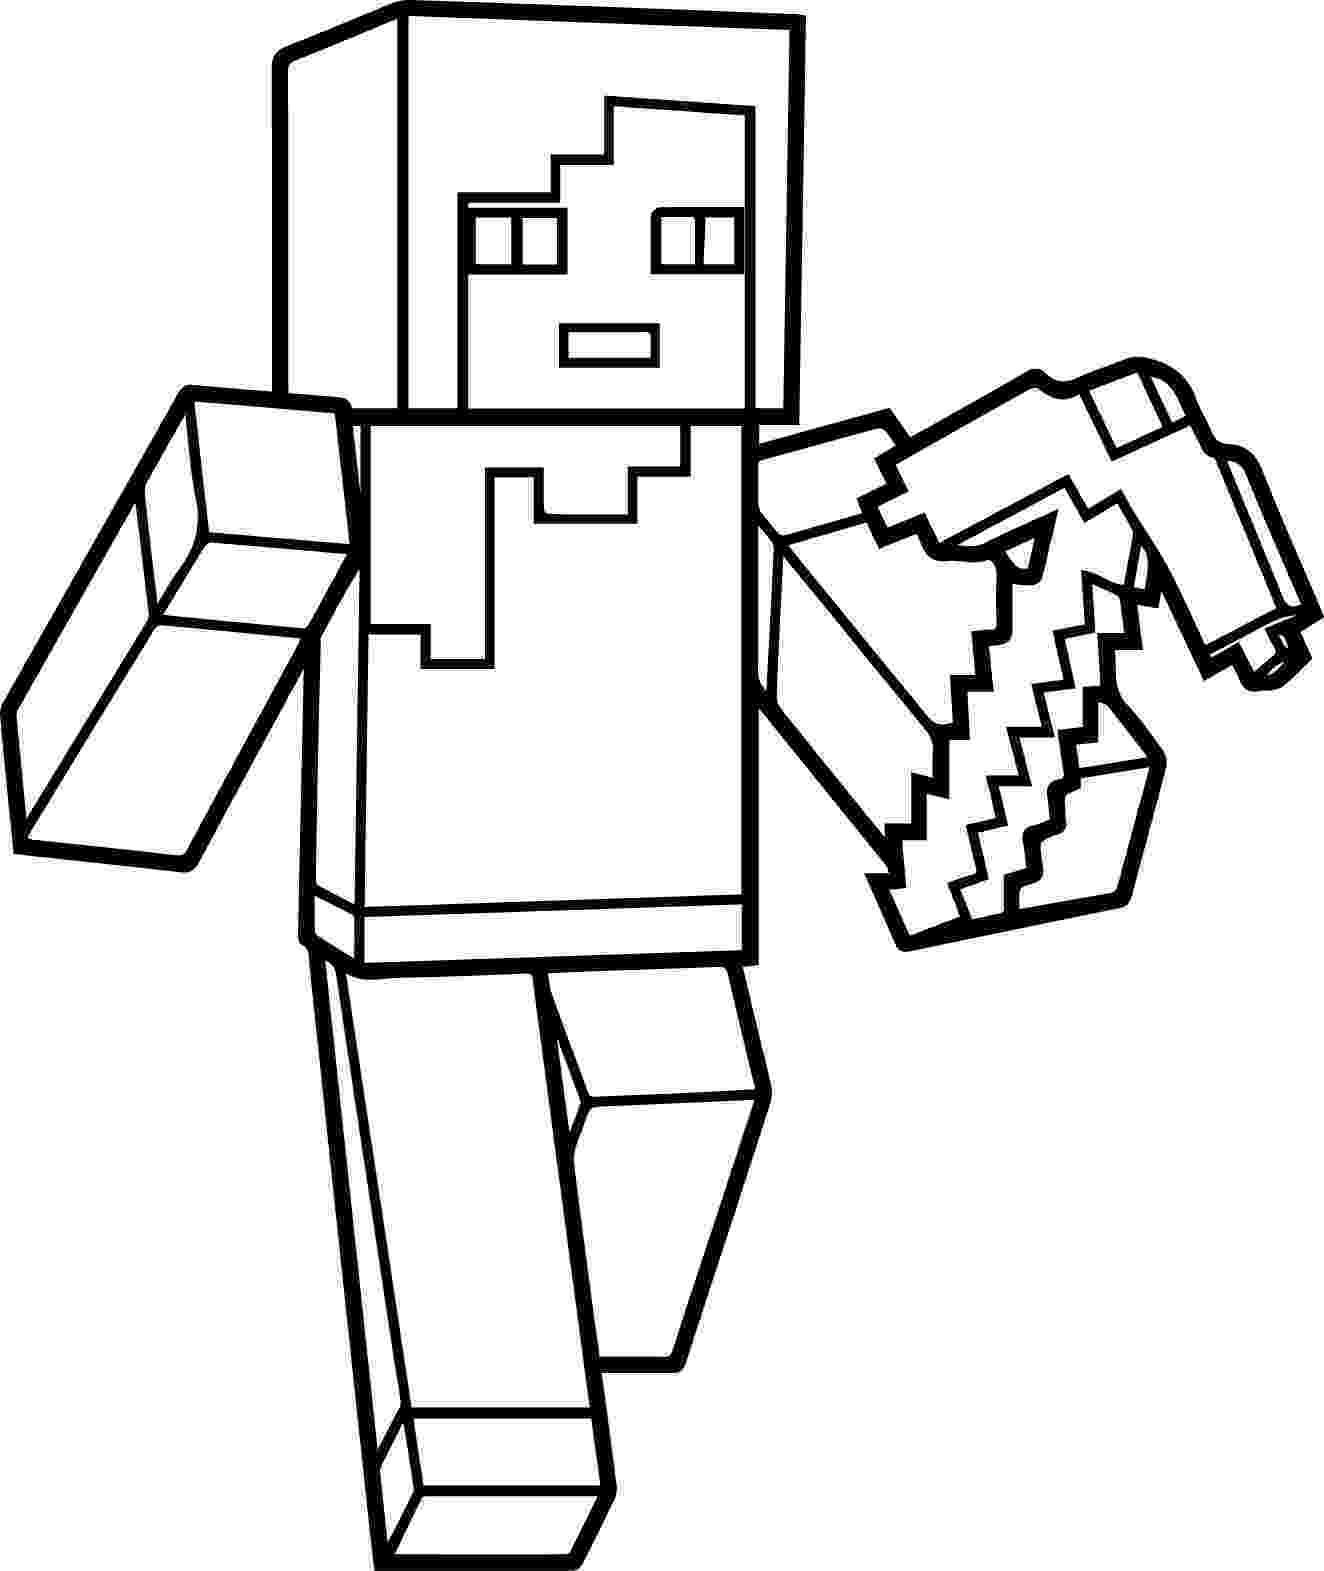 minecraft black and white pictures minecraft logo 1007 free transparent png logos pictures minecraft white and black 